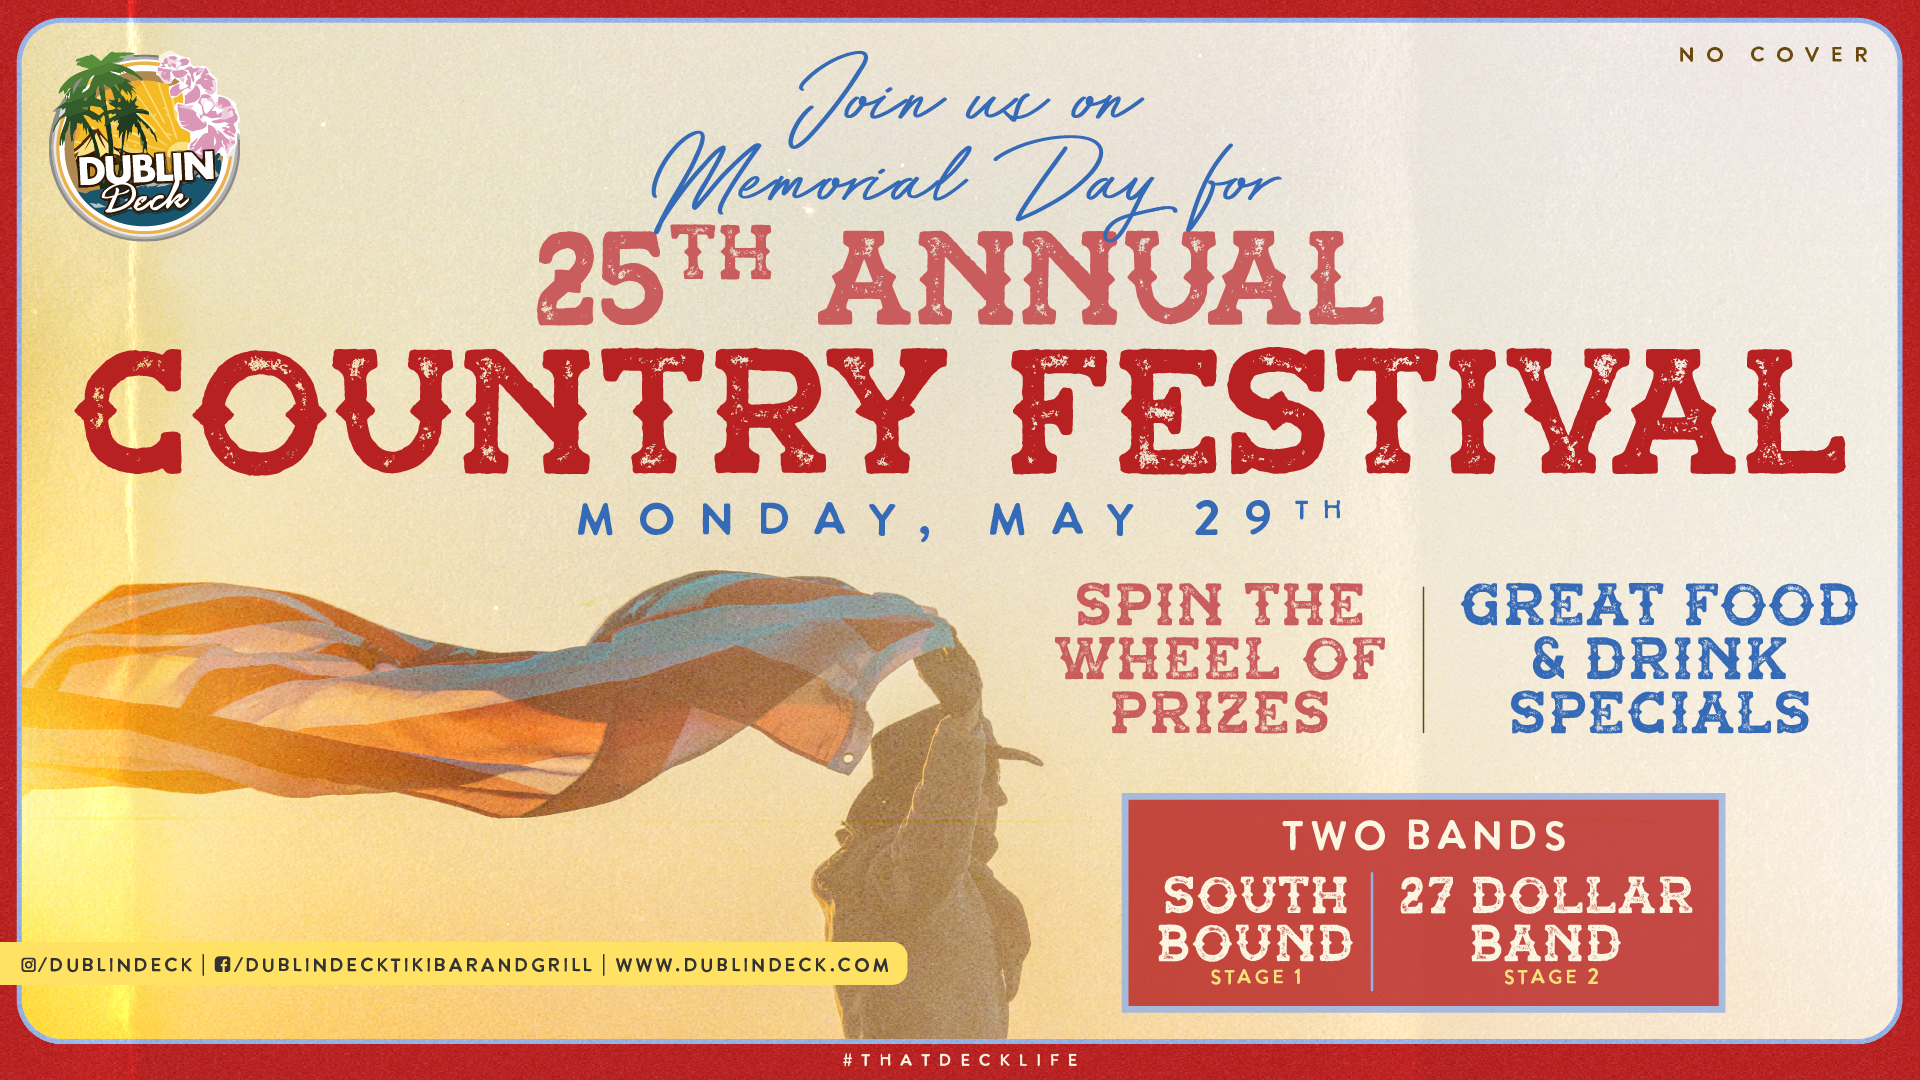 Celebrate Memorial Day at Dublin Deck with the 25th Annual Country Fest! We'll have 2 great brands taking the stage, food & drink specials, and a chance to spin the wheel for awesome prizes!